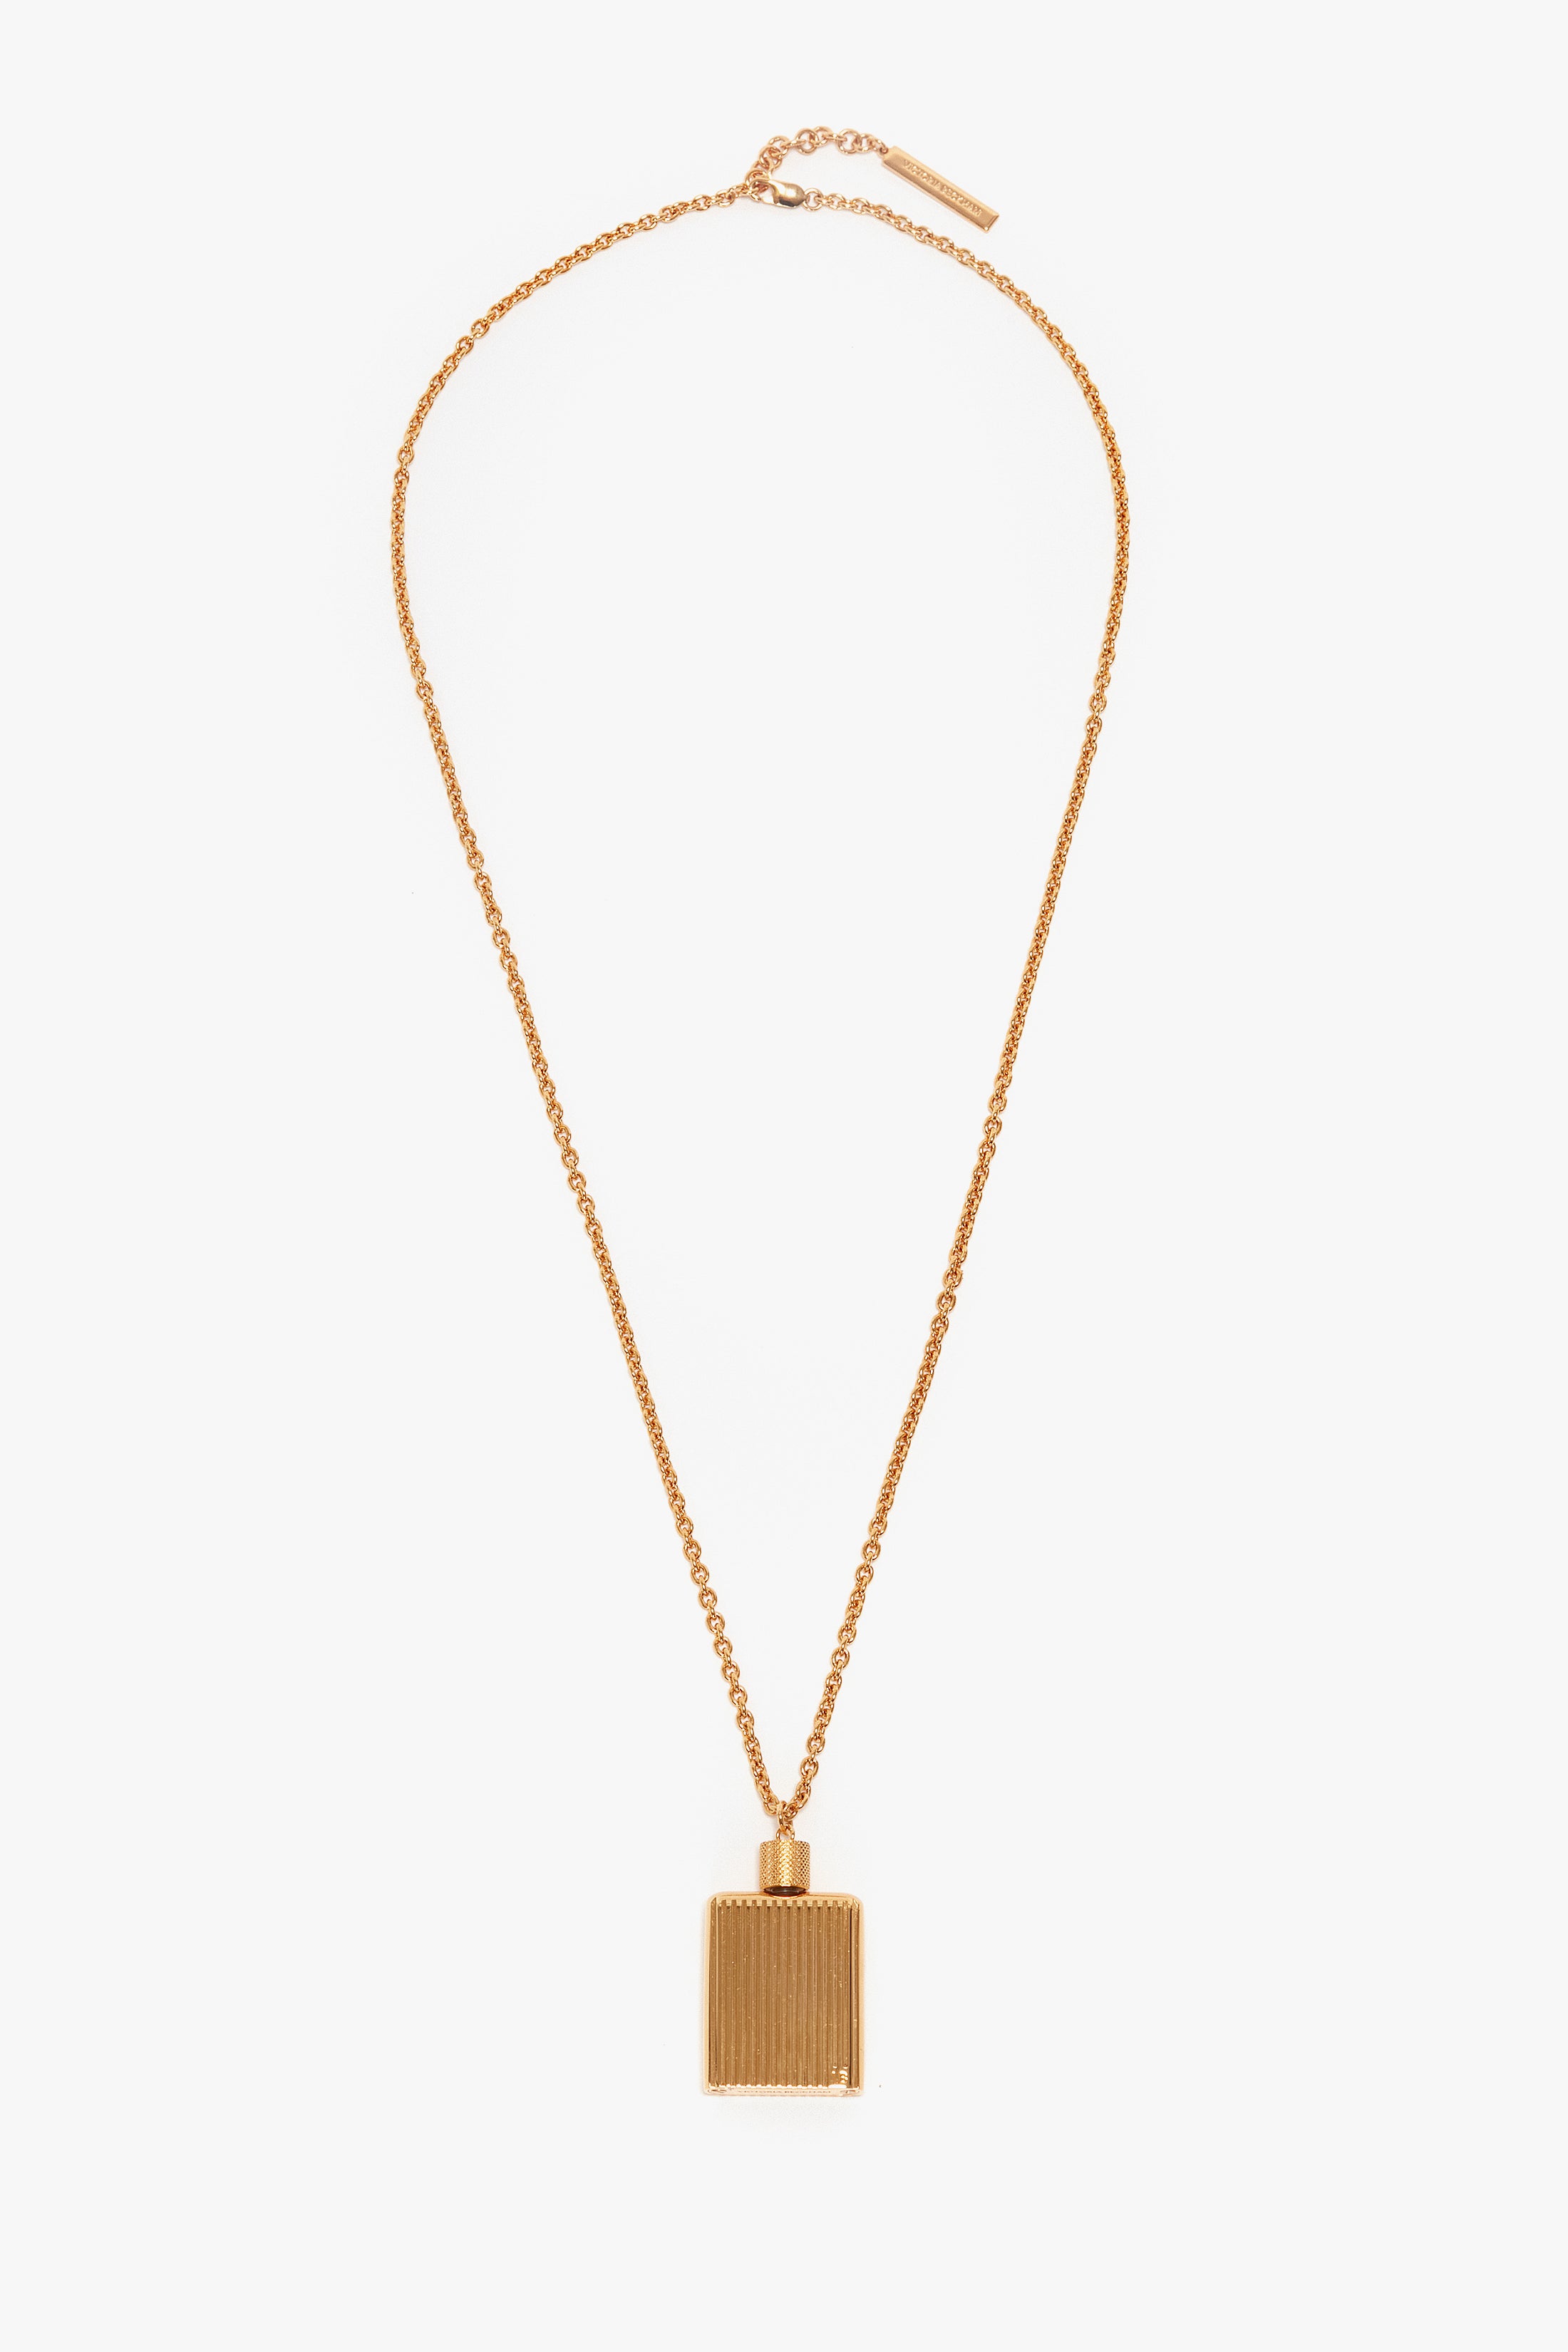 Exclusive Perfume Bottle Necklace In Brushed Gold – Victoria Beckham UK